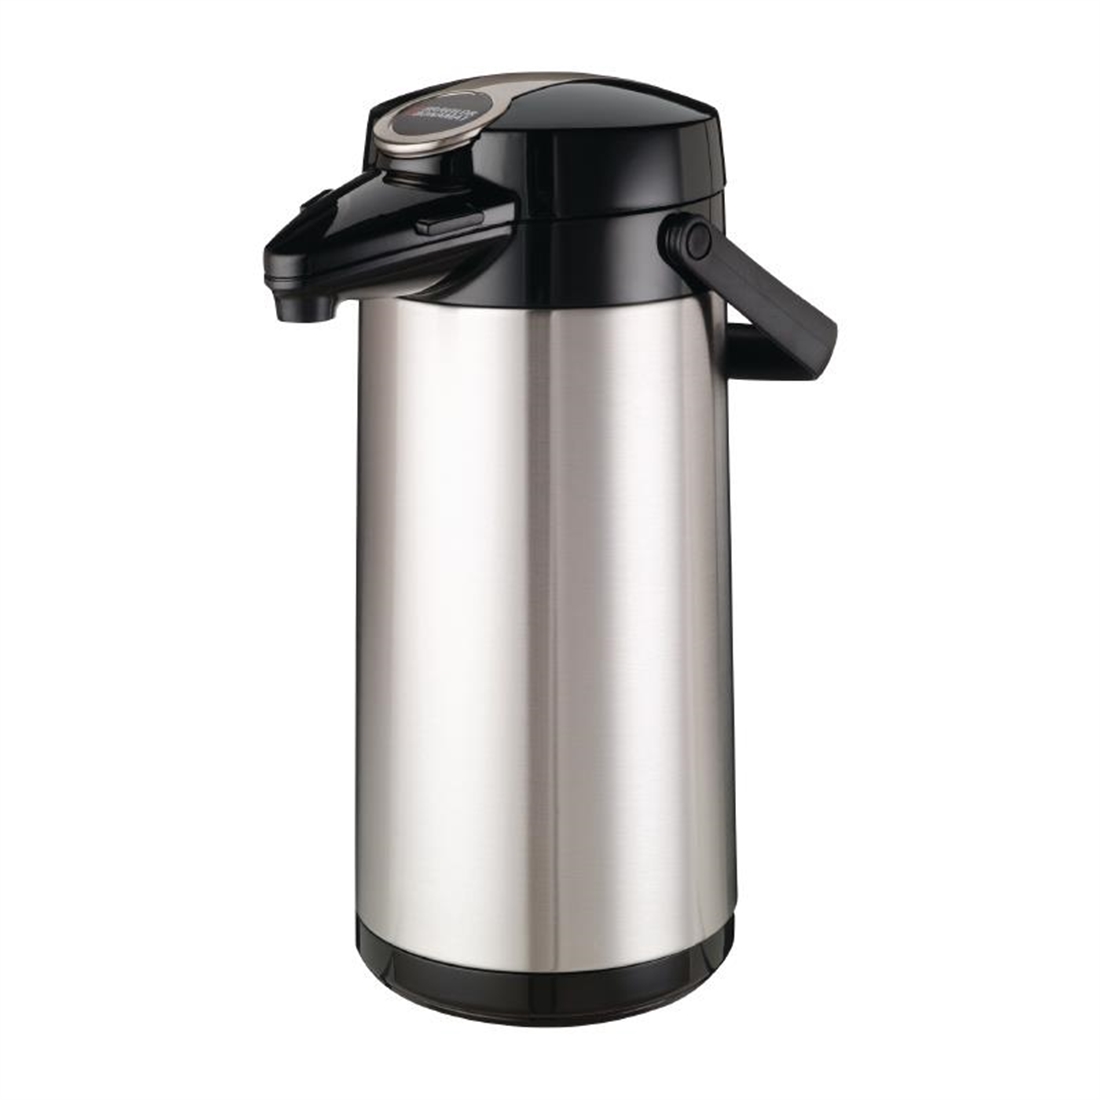 Bravilor Furento 2.2Ltr Airpot with Pump Action Stainless Steel